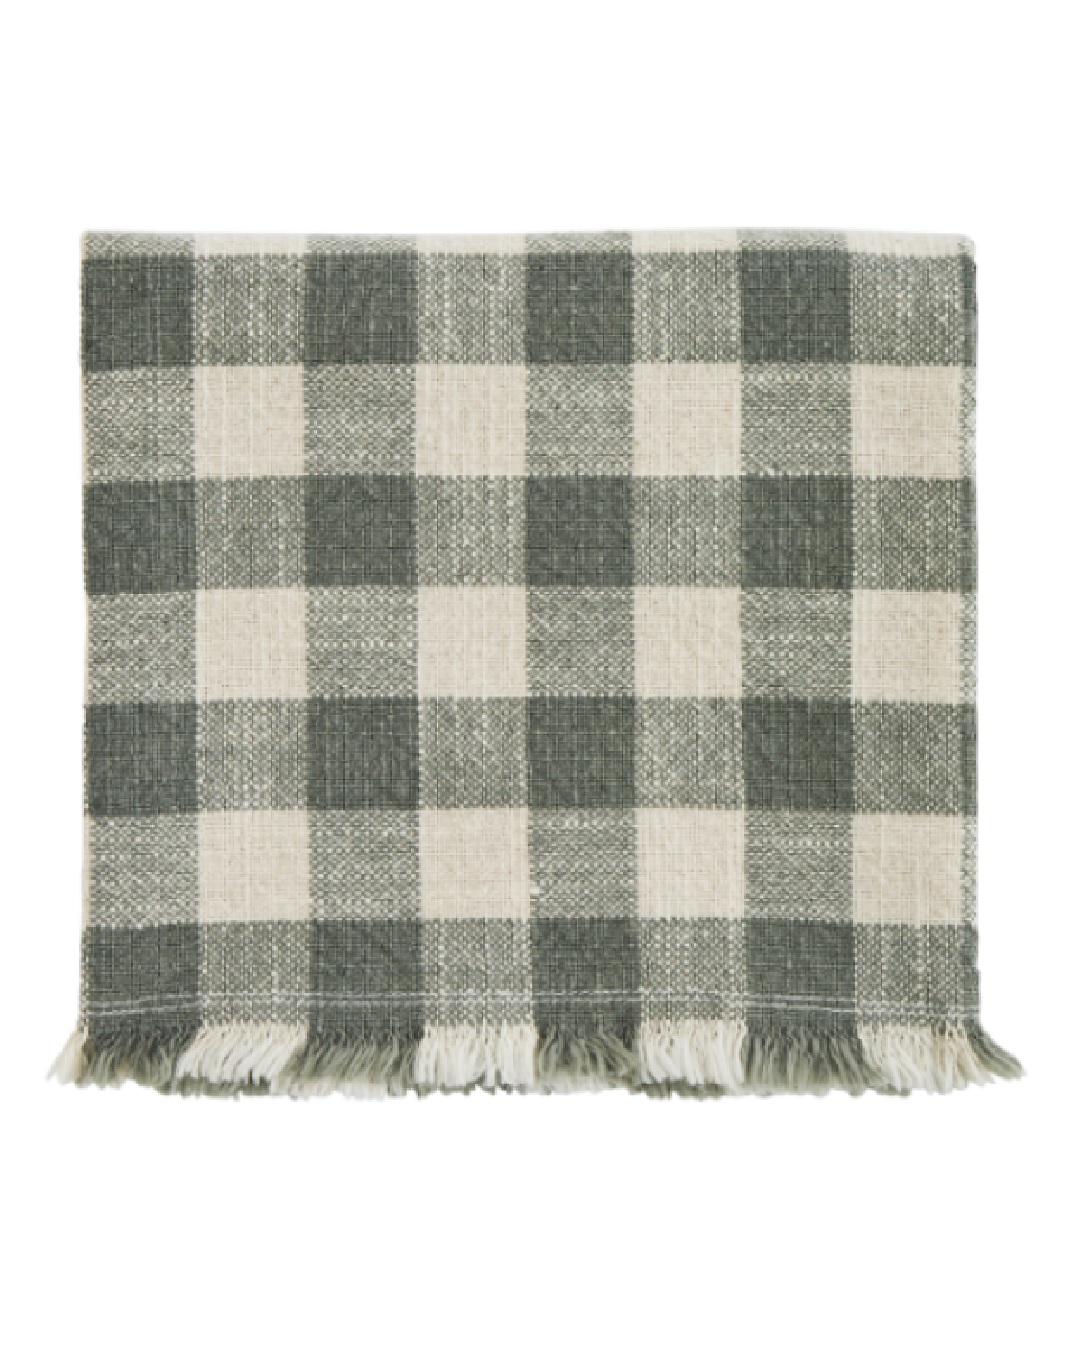 Green checked kitchen towel